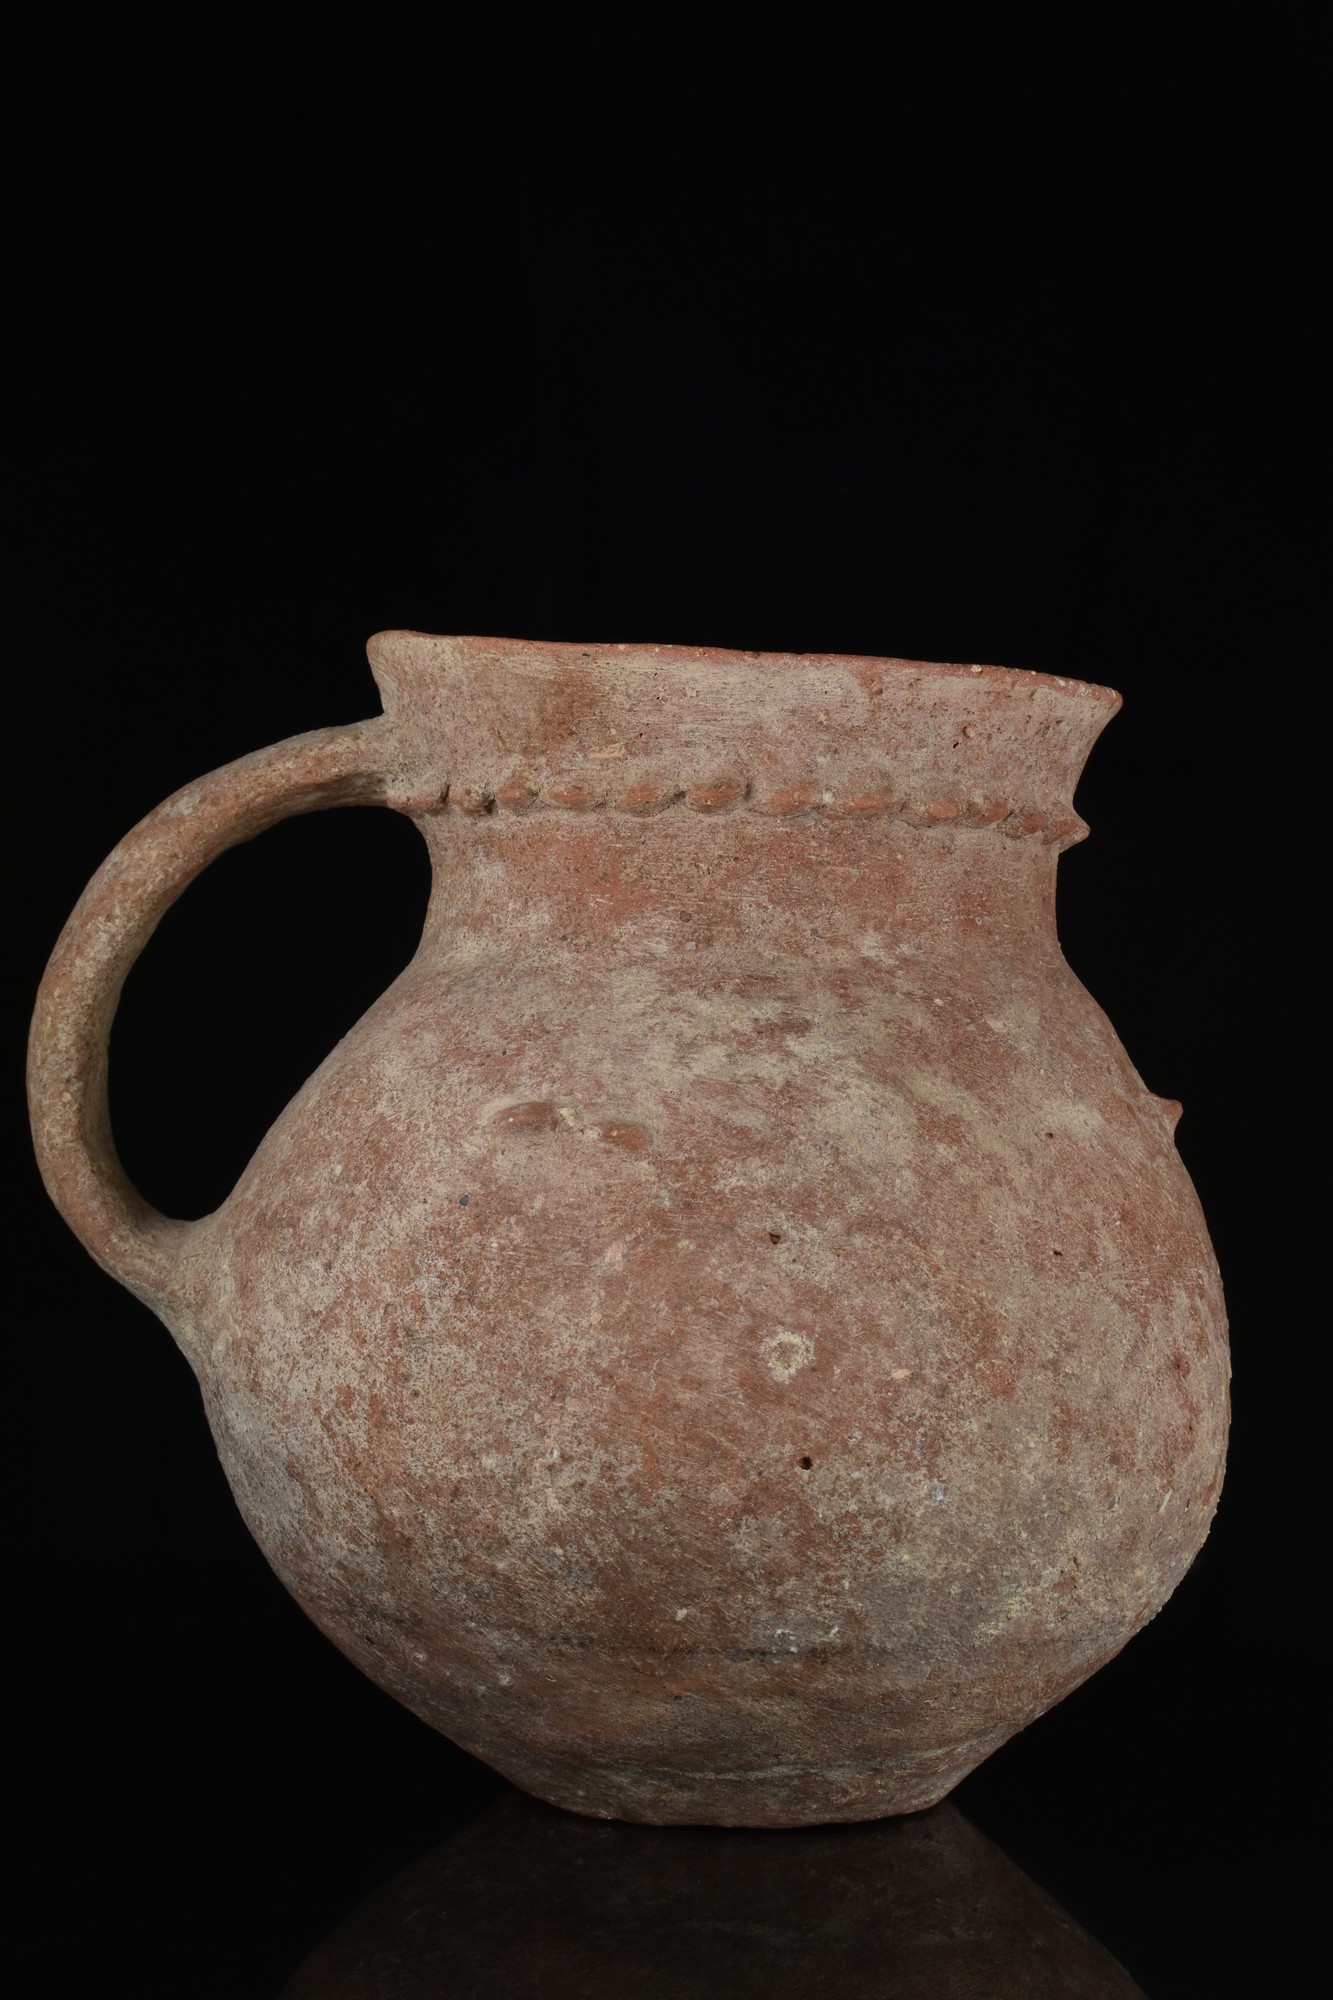 HOLY LAND BRONZE AGE TERRACOTTA VESSEL - Image 2 of 6